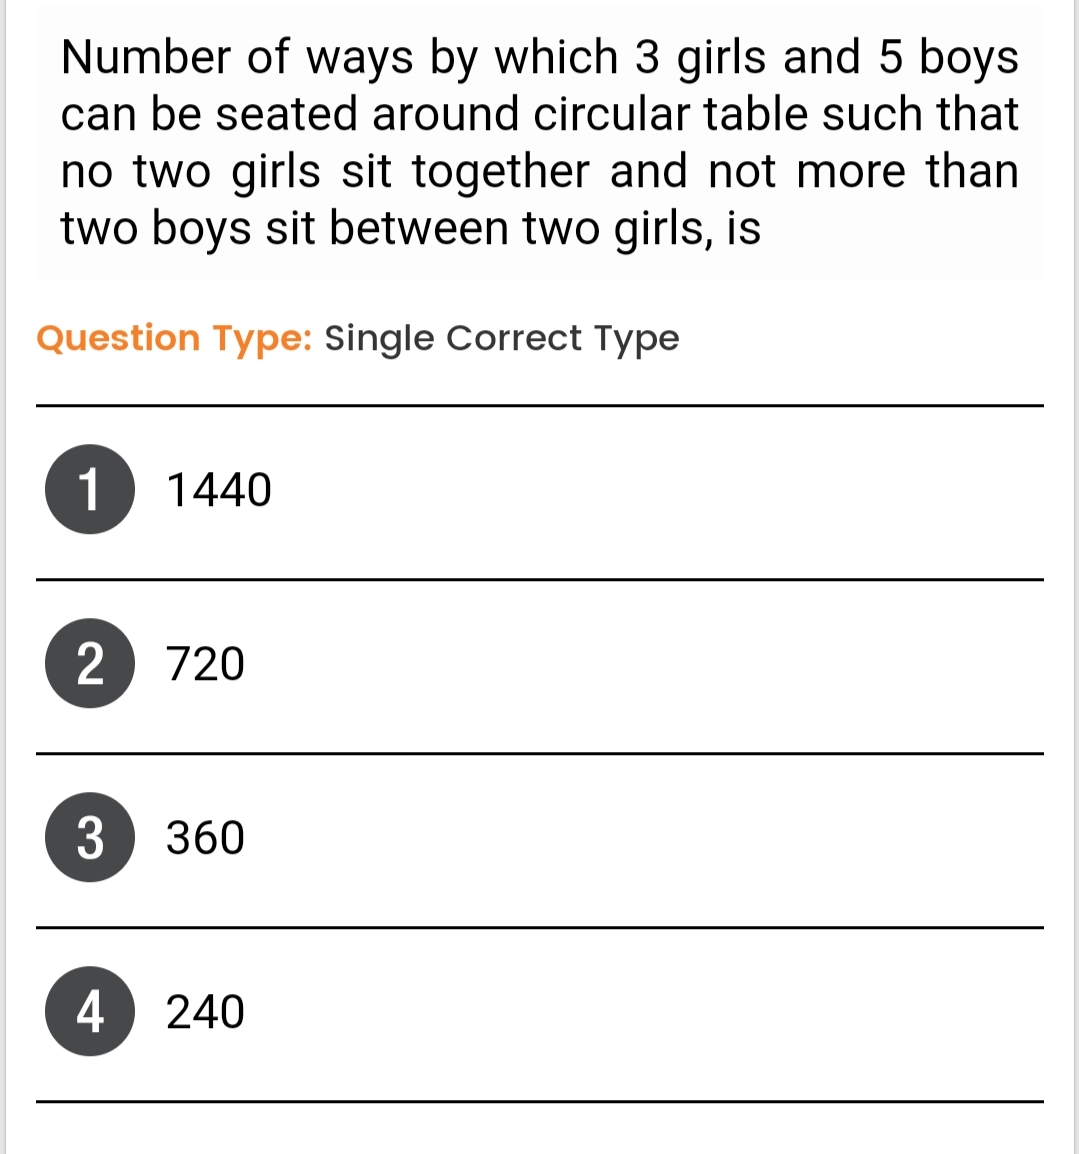 Number of ways by which 3 girls and 5 boys
can be seated around circular table such that
no two girls sit together and not more than
two boys sit between two girls, is
Question Type: Single Correct Type
1
1440
2 720
3 360
4 240
